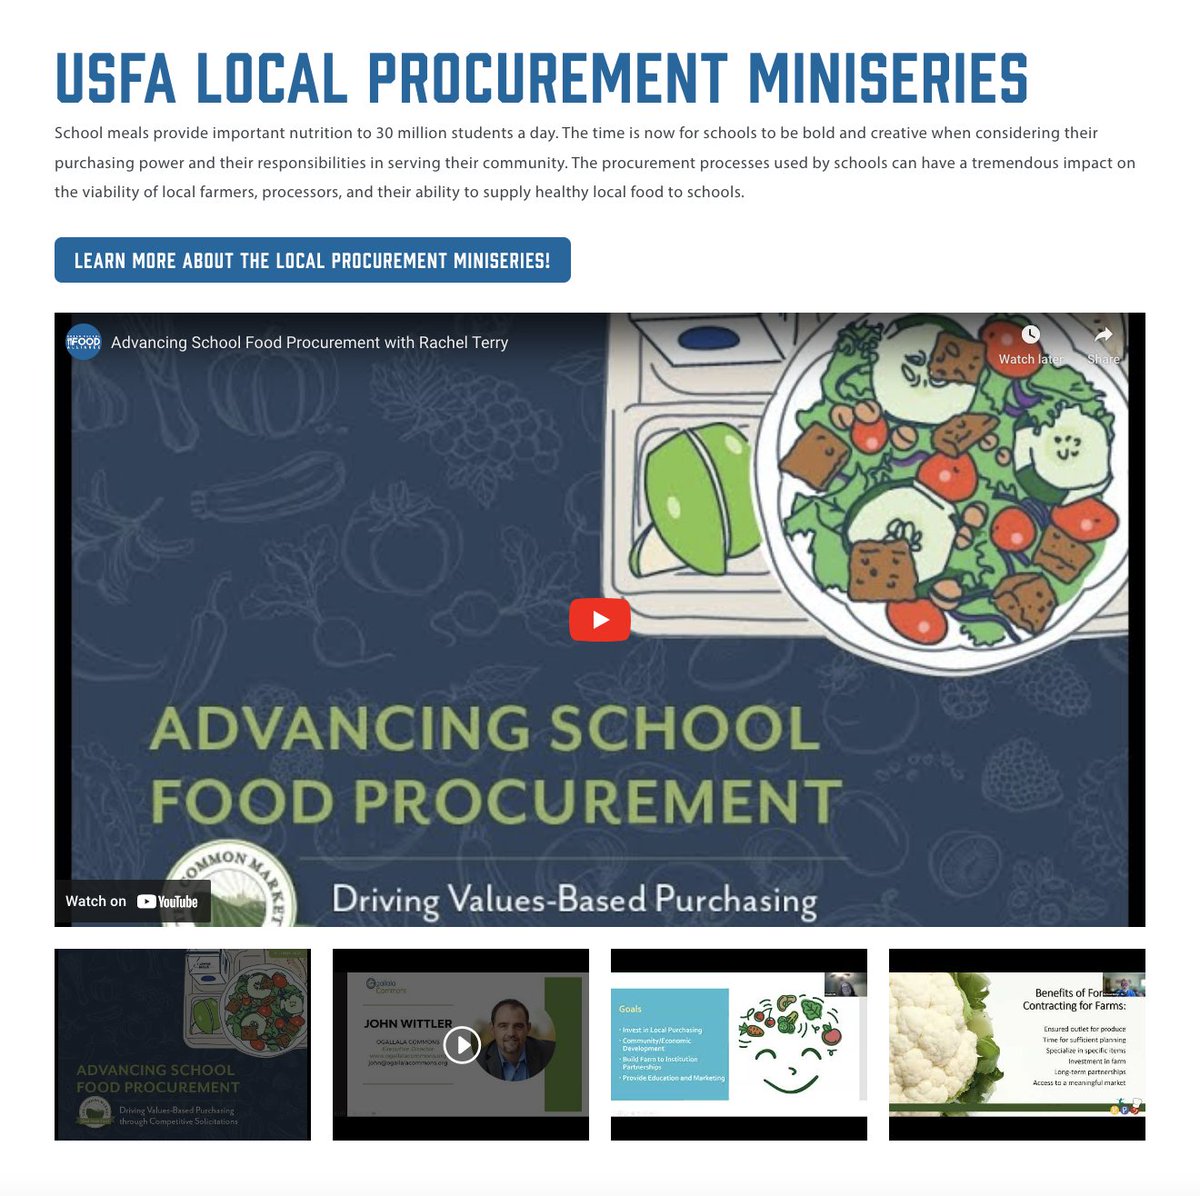 Last month, the Urban School Food Alliance brought together leaders from across the #schoolfood system to share the importance of partnerships + collaboration between school districts and local producers. Access the slides + recordings on our website now: bit.ly/3pAMetG